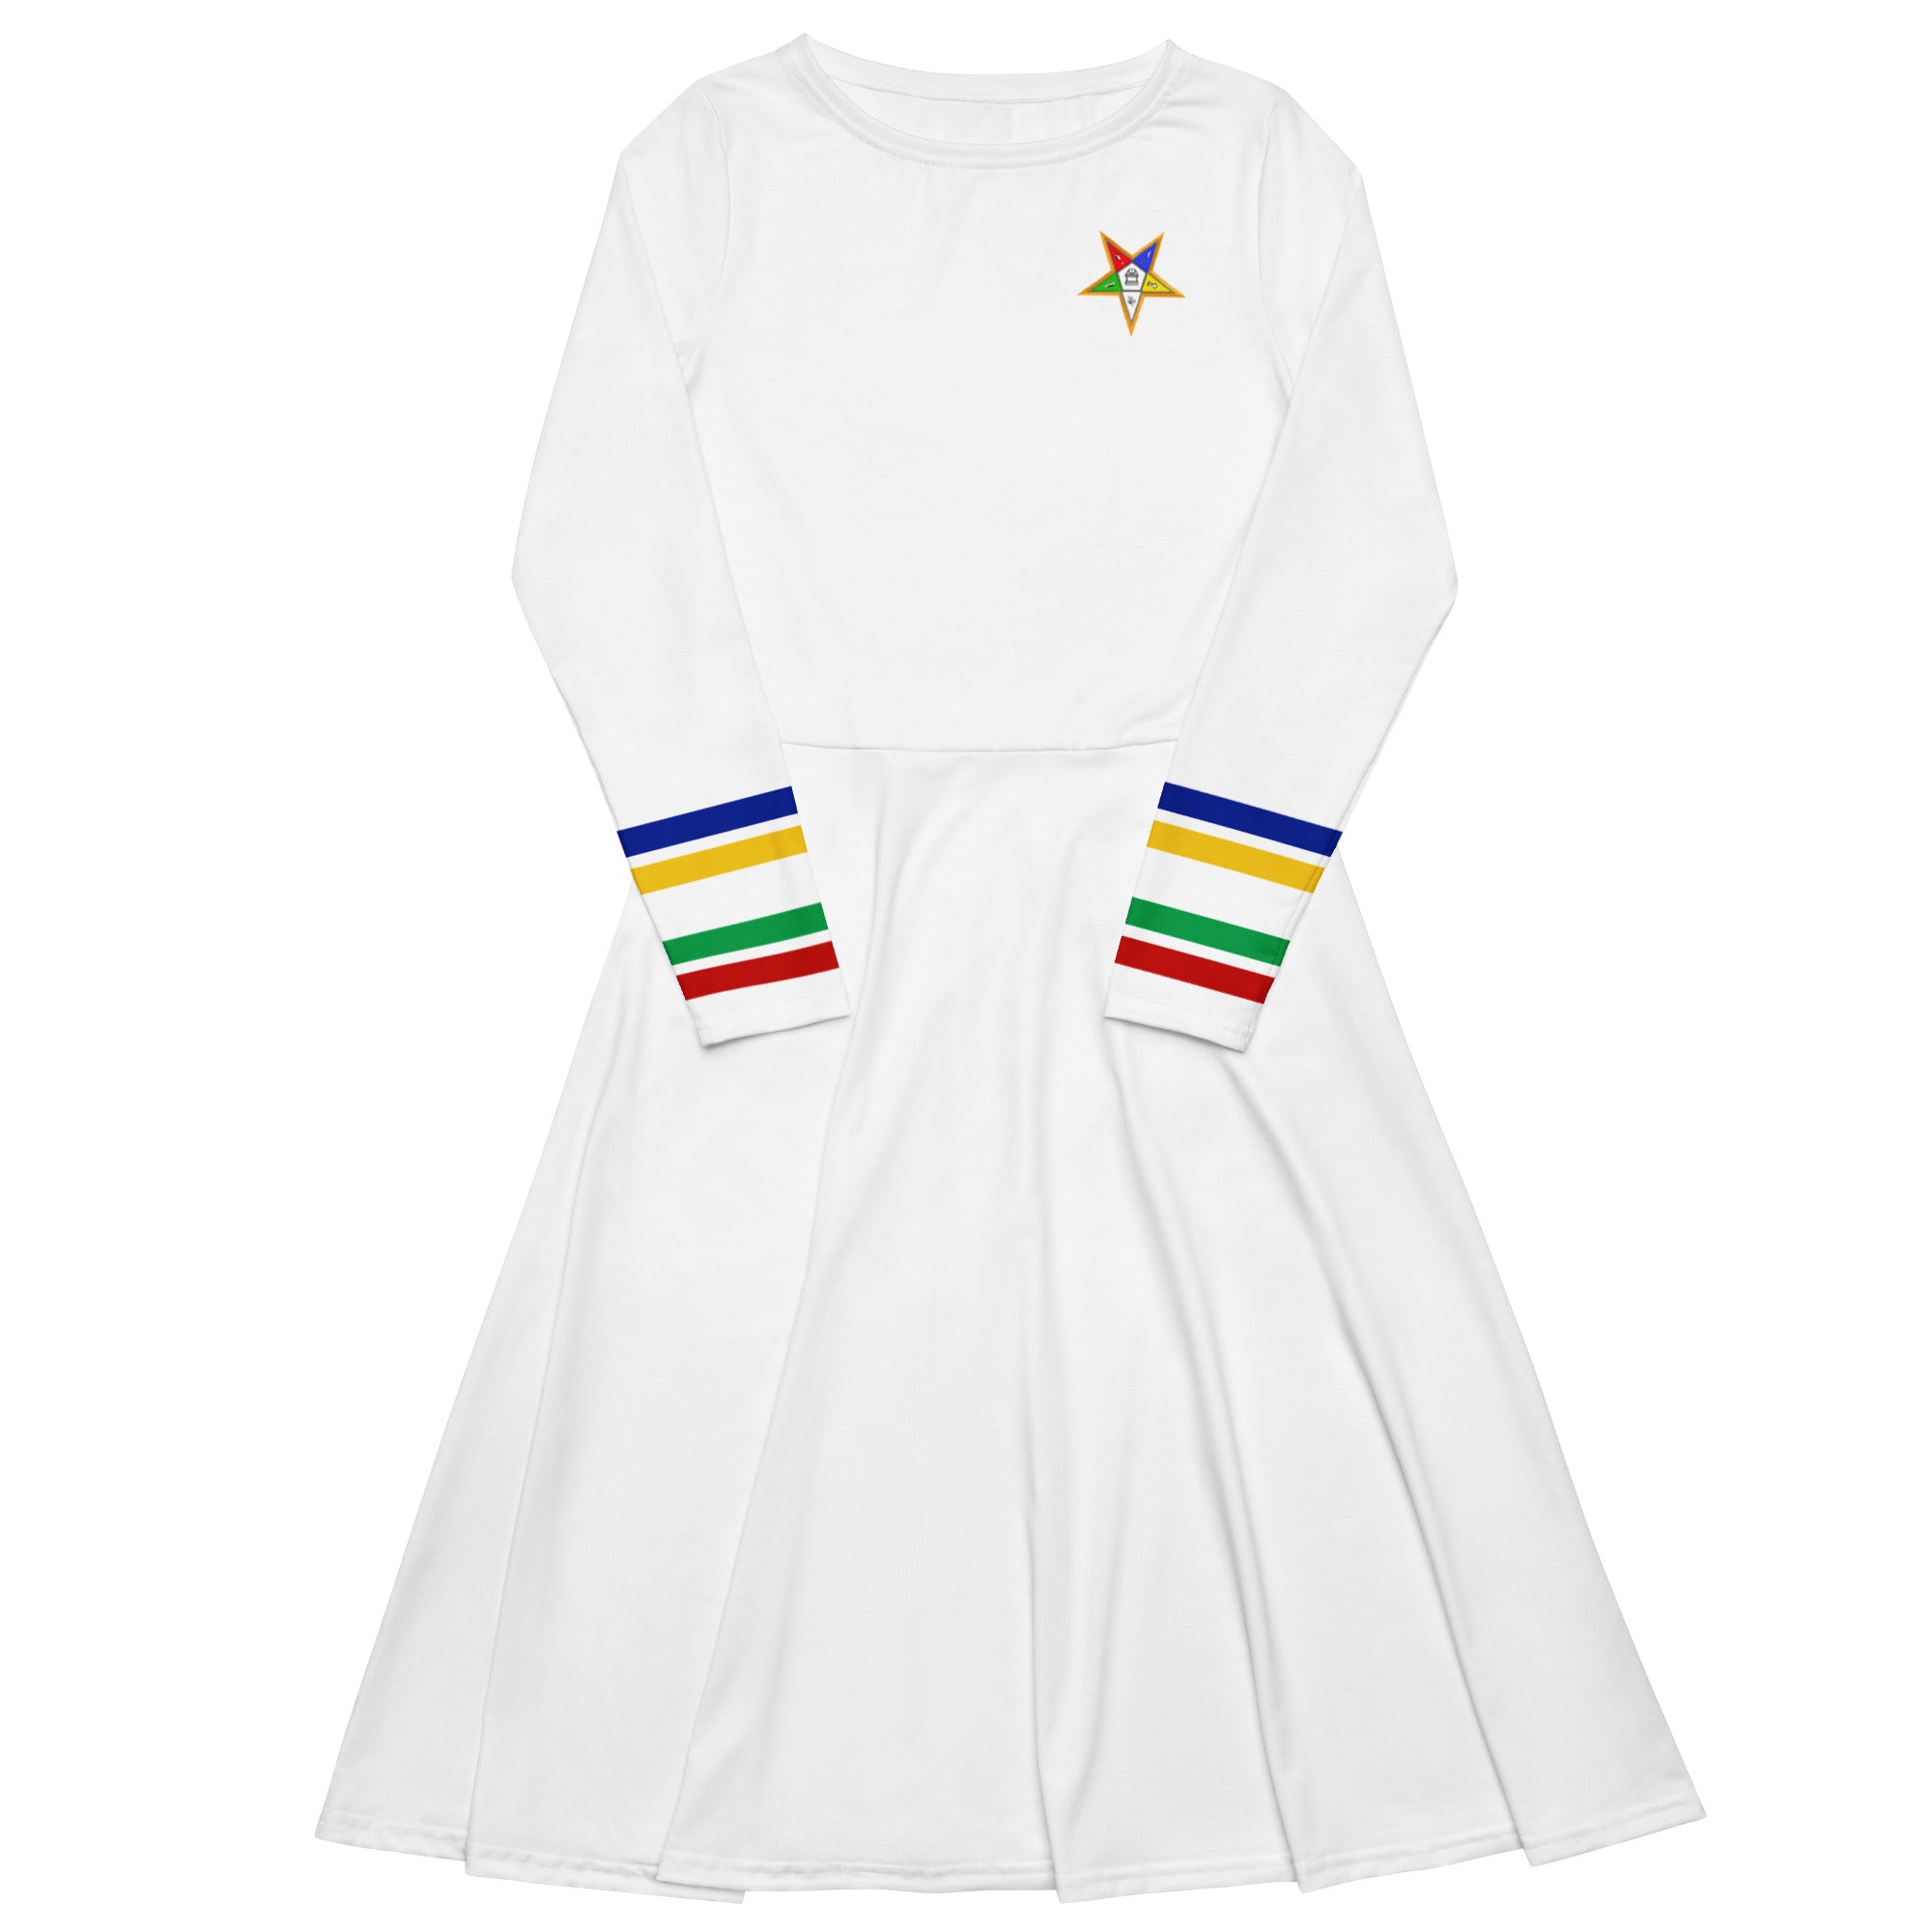 Order of the Eastern Star | OES Bright Star Dress